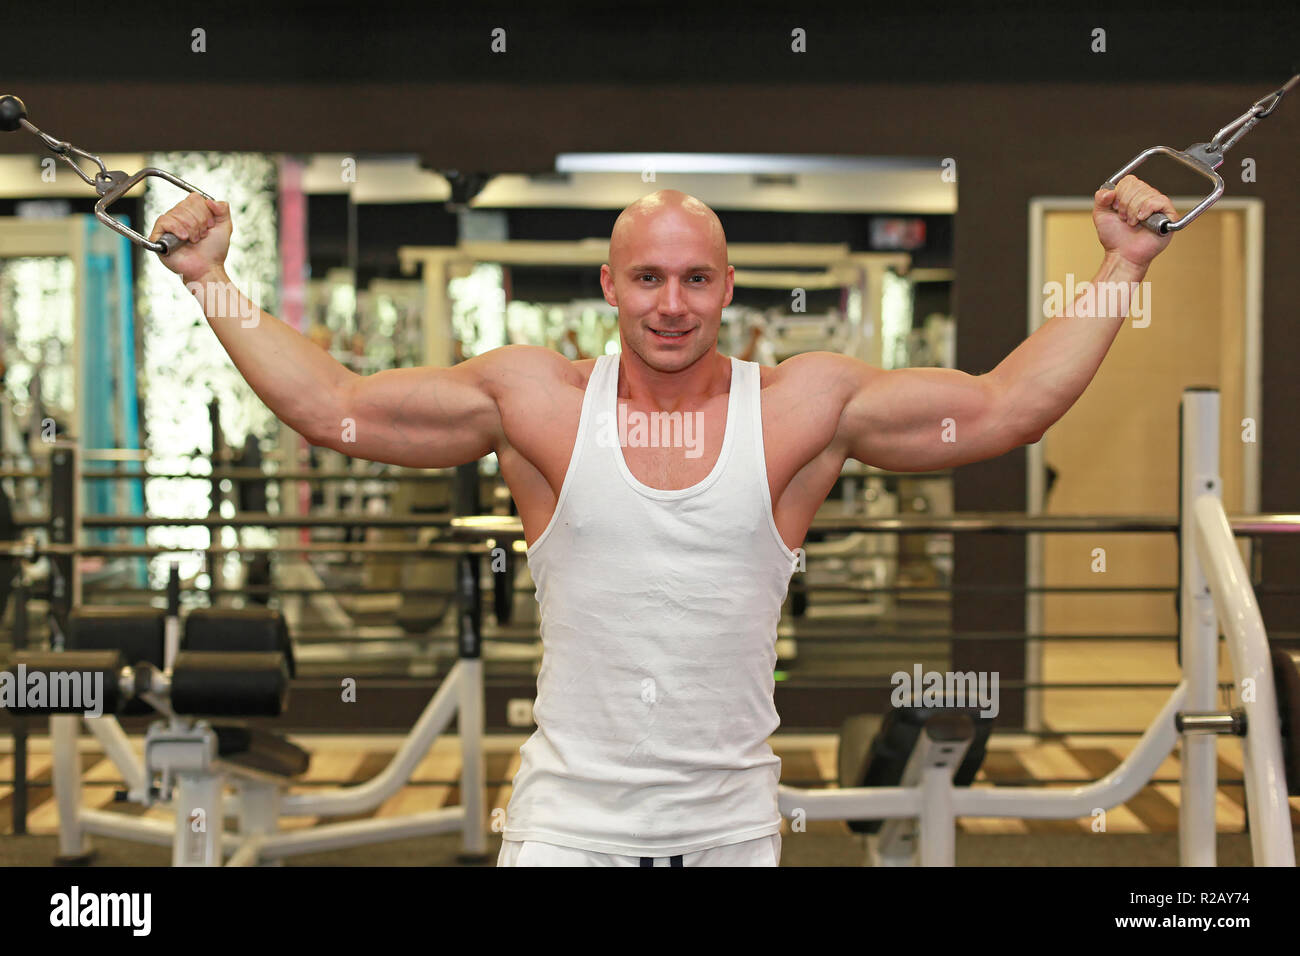 Young strong man workout exercise in gym Stock Photo - Alamy